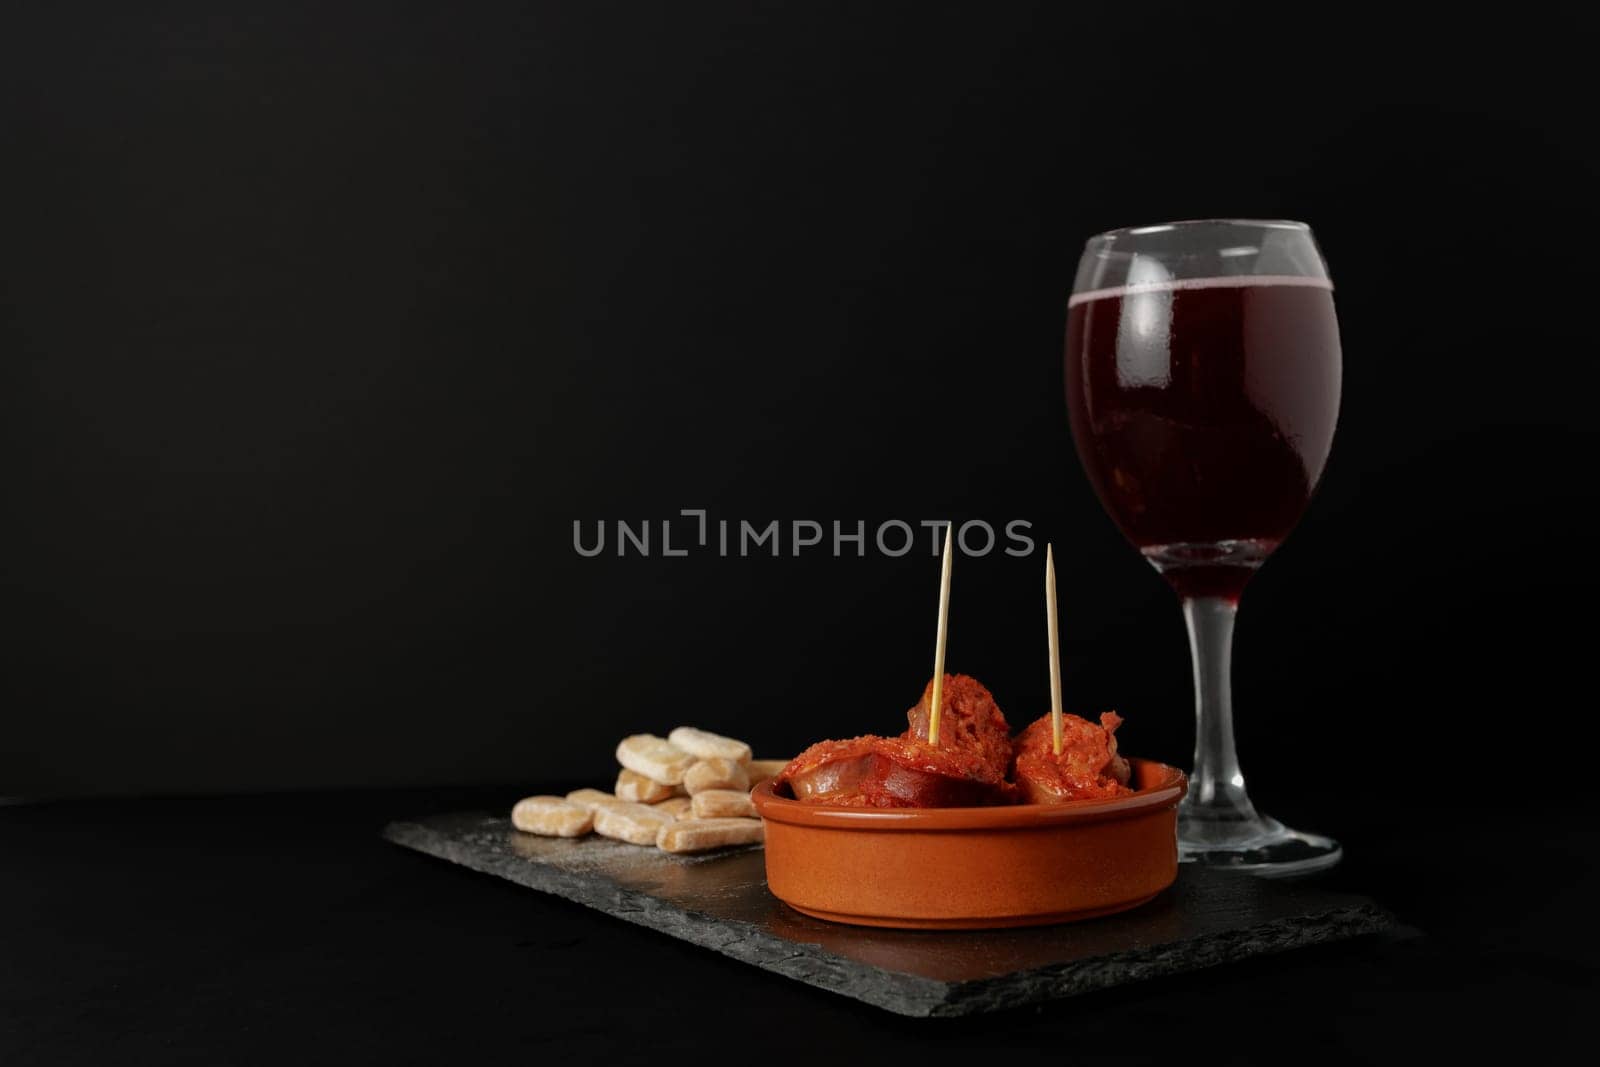 chorizo frito ,typical spanish tapa in a clay pot accompanied by bread and a glass of red wine.